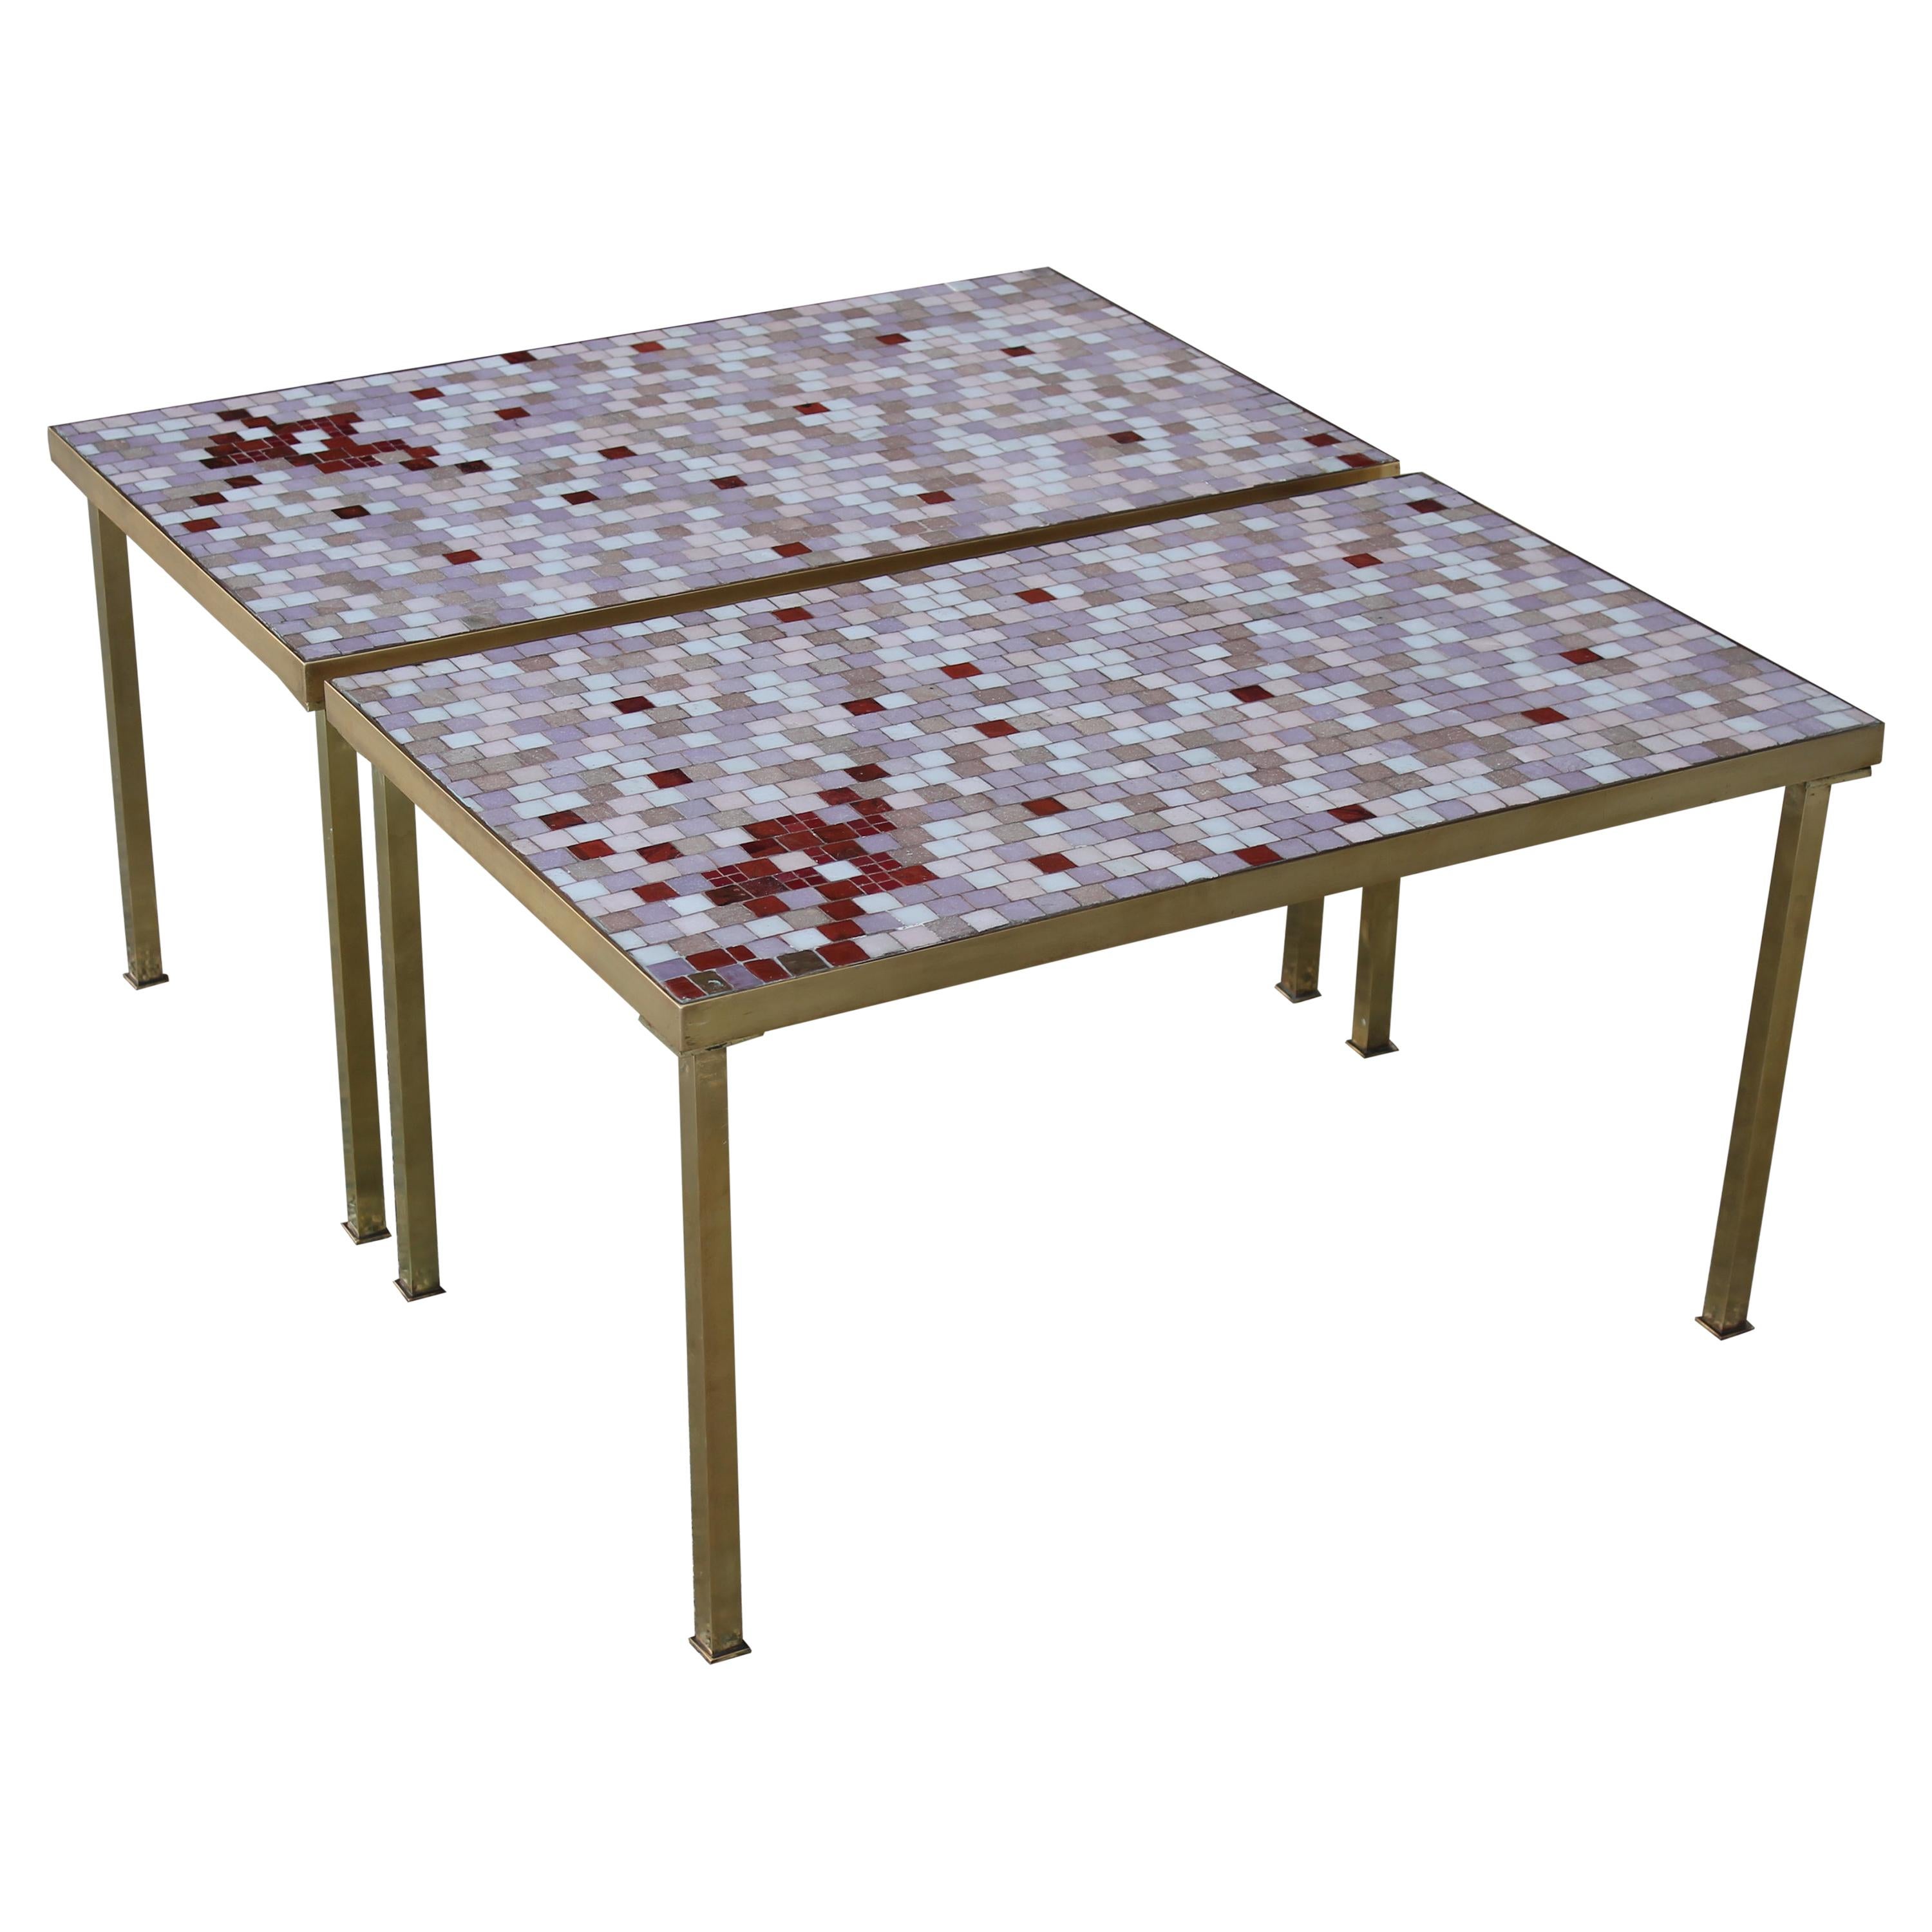 Pair of Italian Glass Tile Tables in the style of Harvey Probber